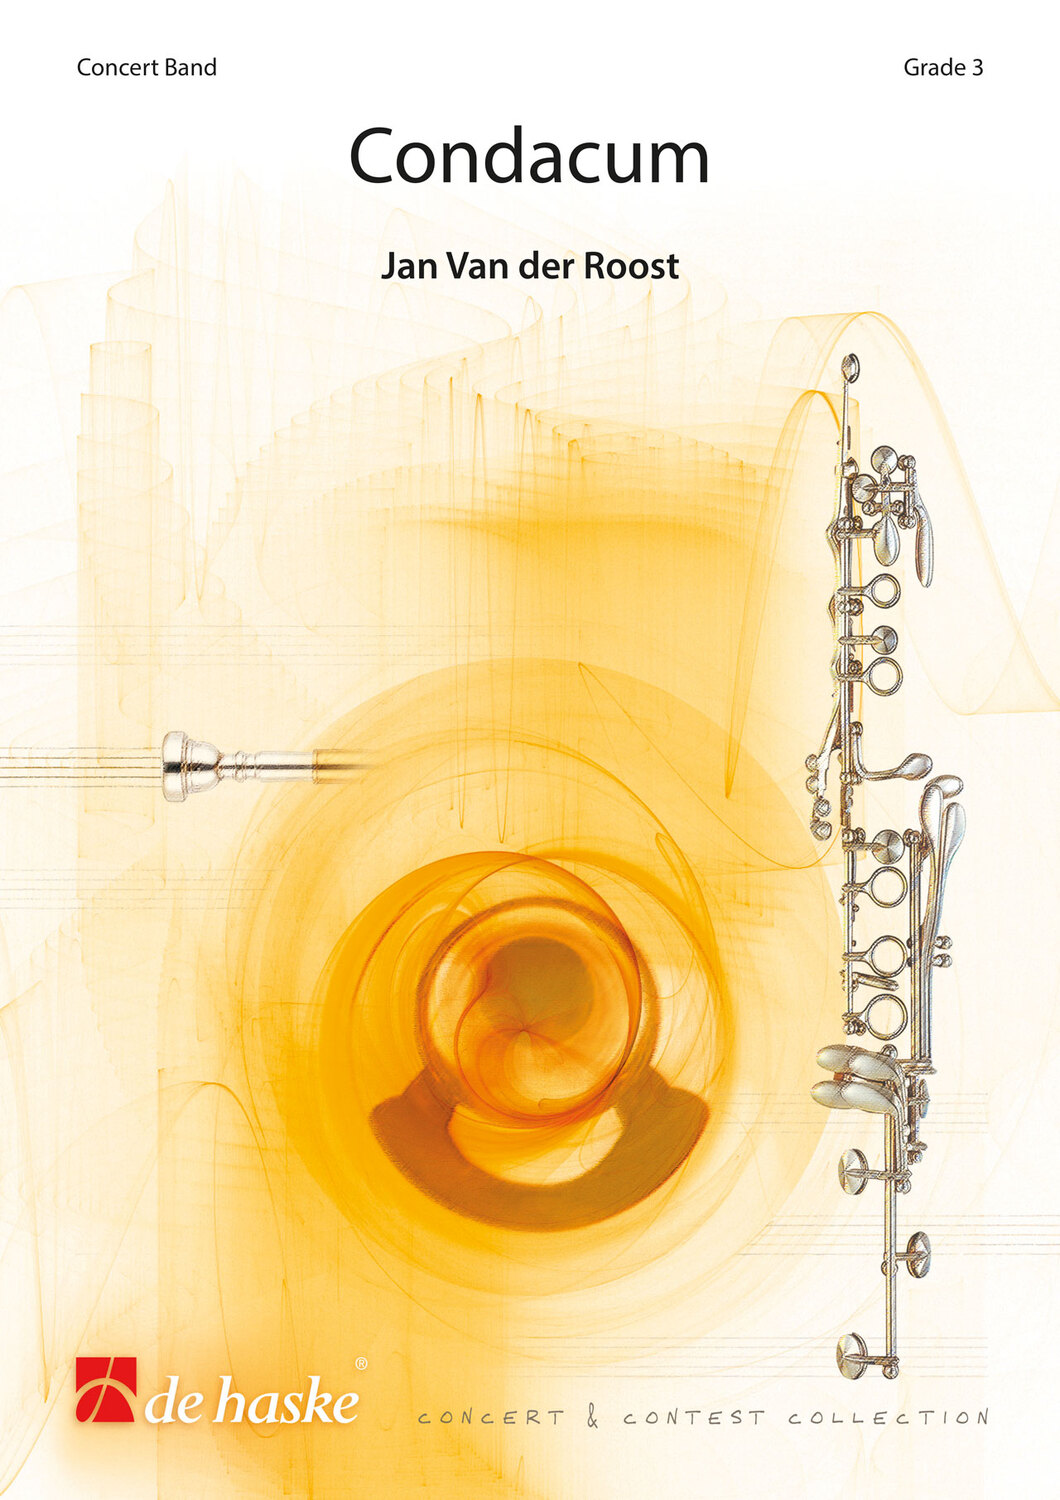 Cover: 9790035047828 | Condacum | Jan Van der Roost | Concert and Contest Collection CBHA